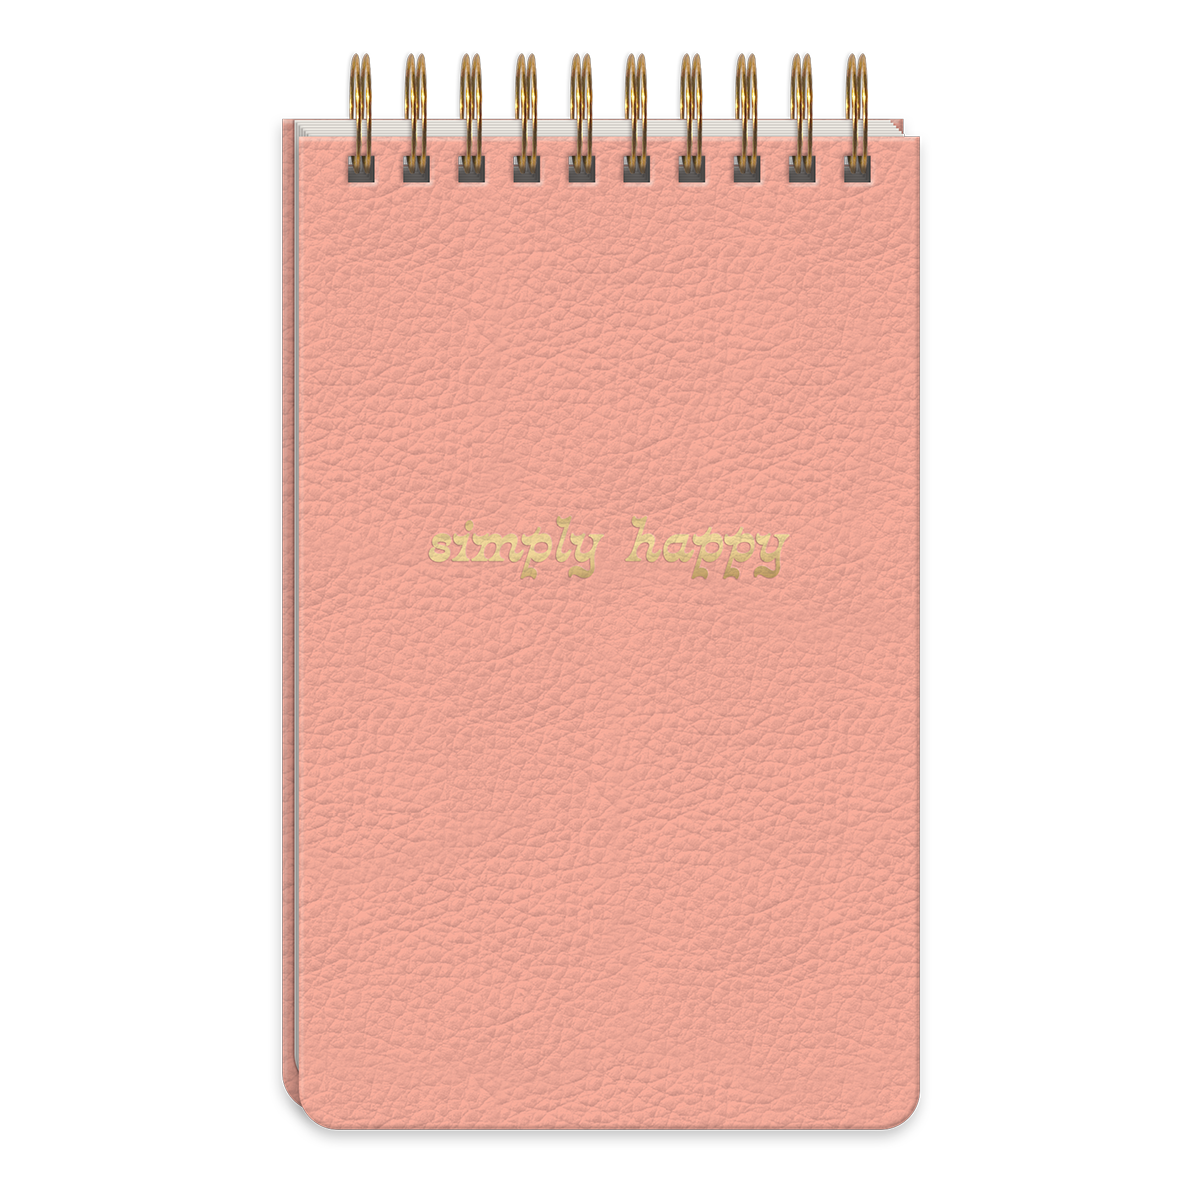 Hazy Florals Pink Solid Spiral Notepad Product